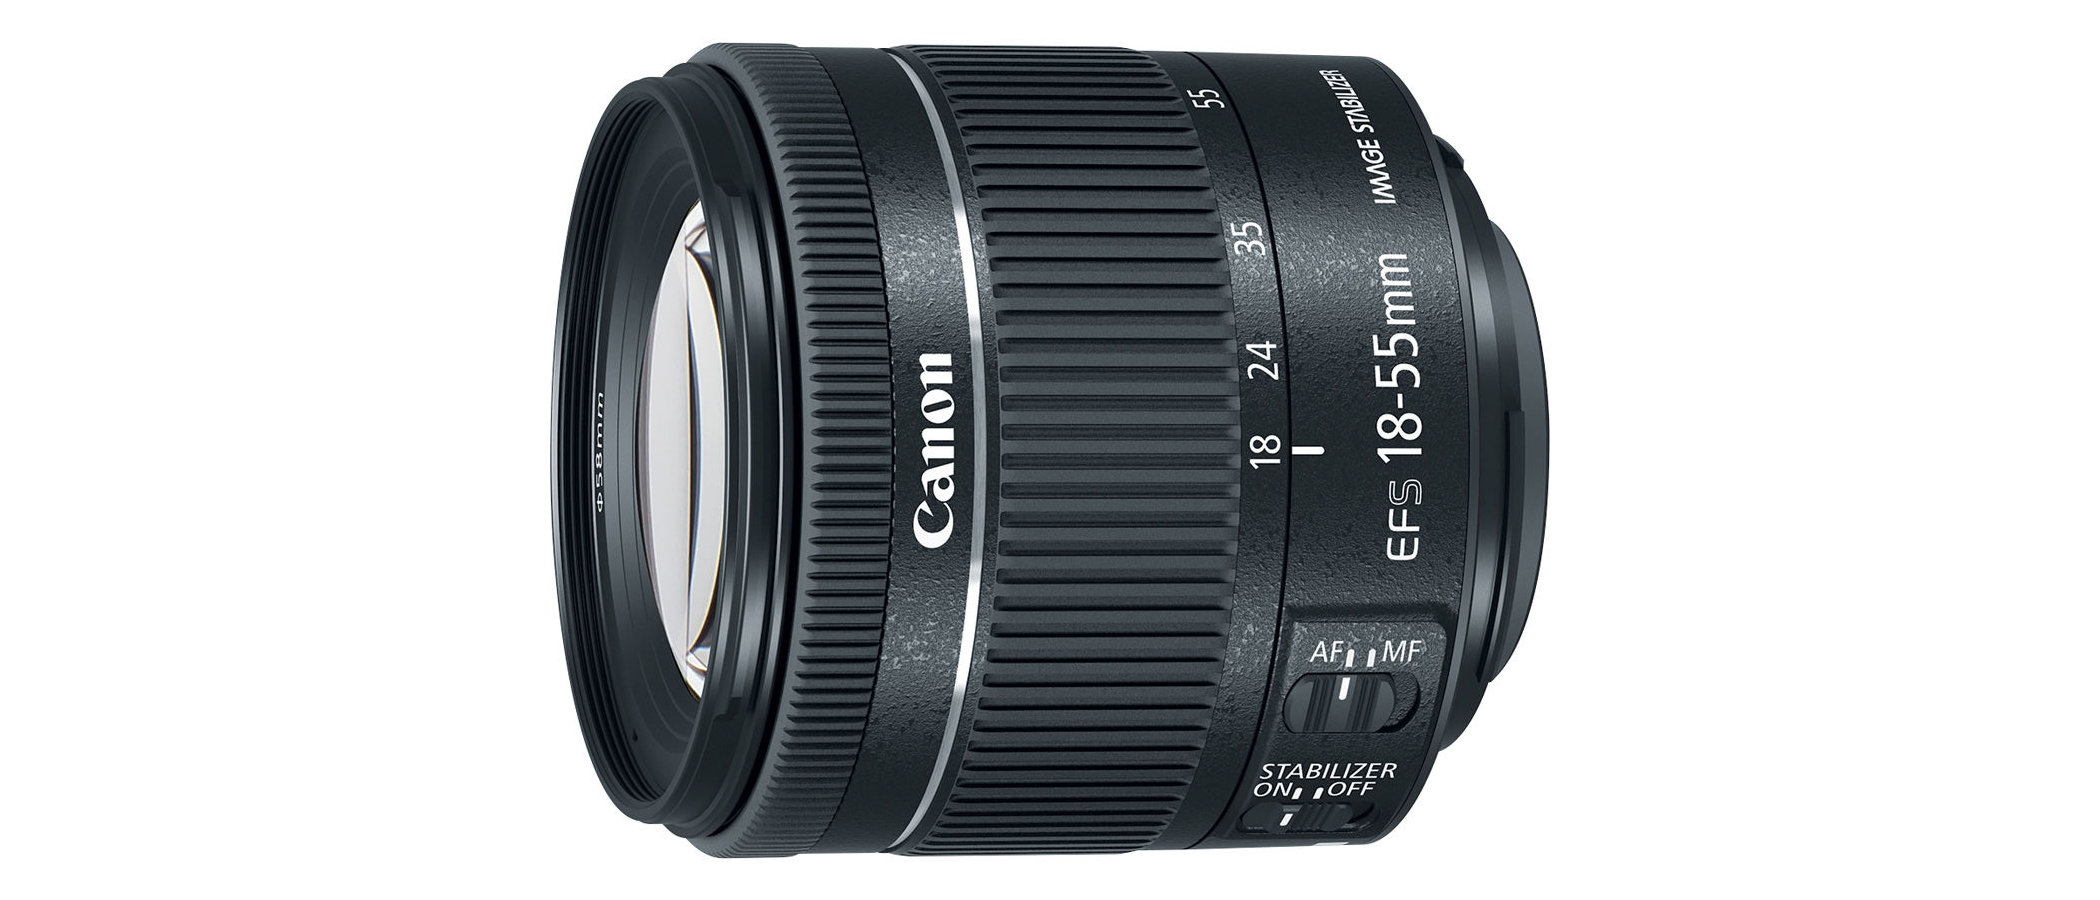 Canon EF-S 18-55mm f/4-5.6 IS STM review | Digital Camera World